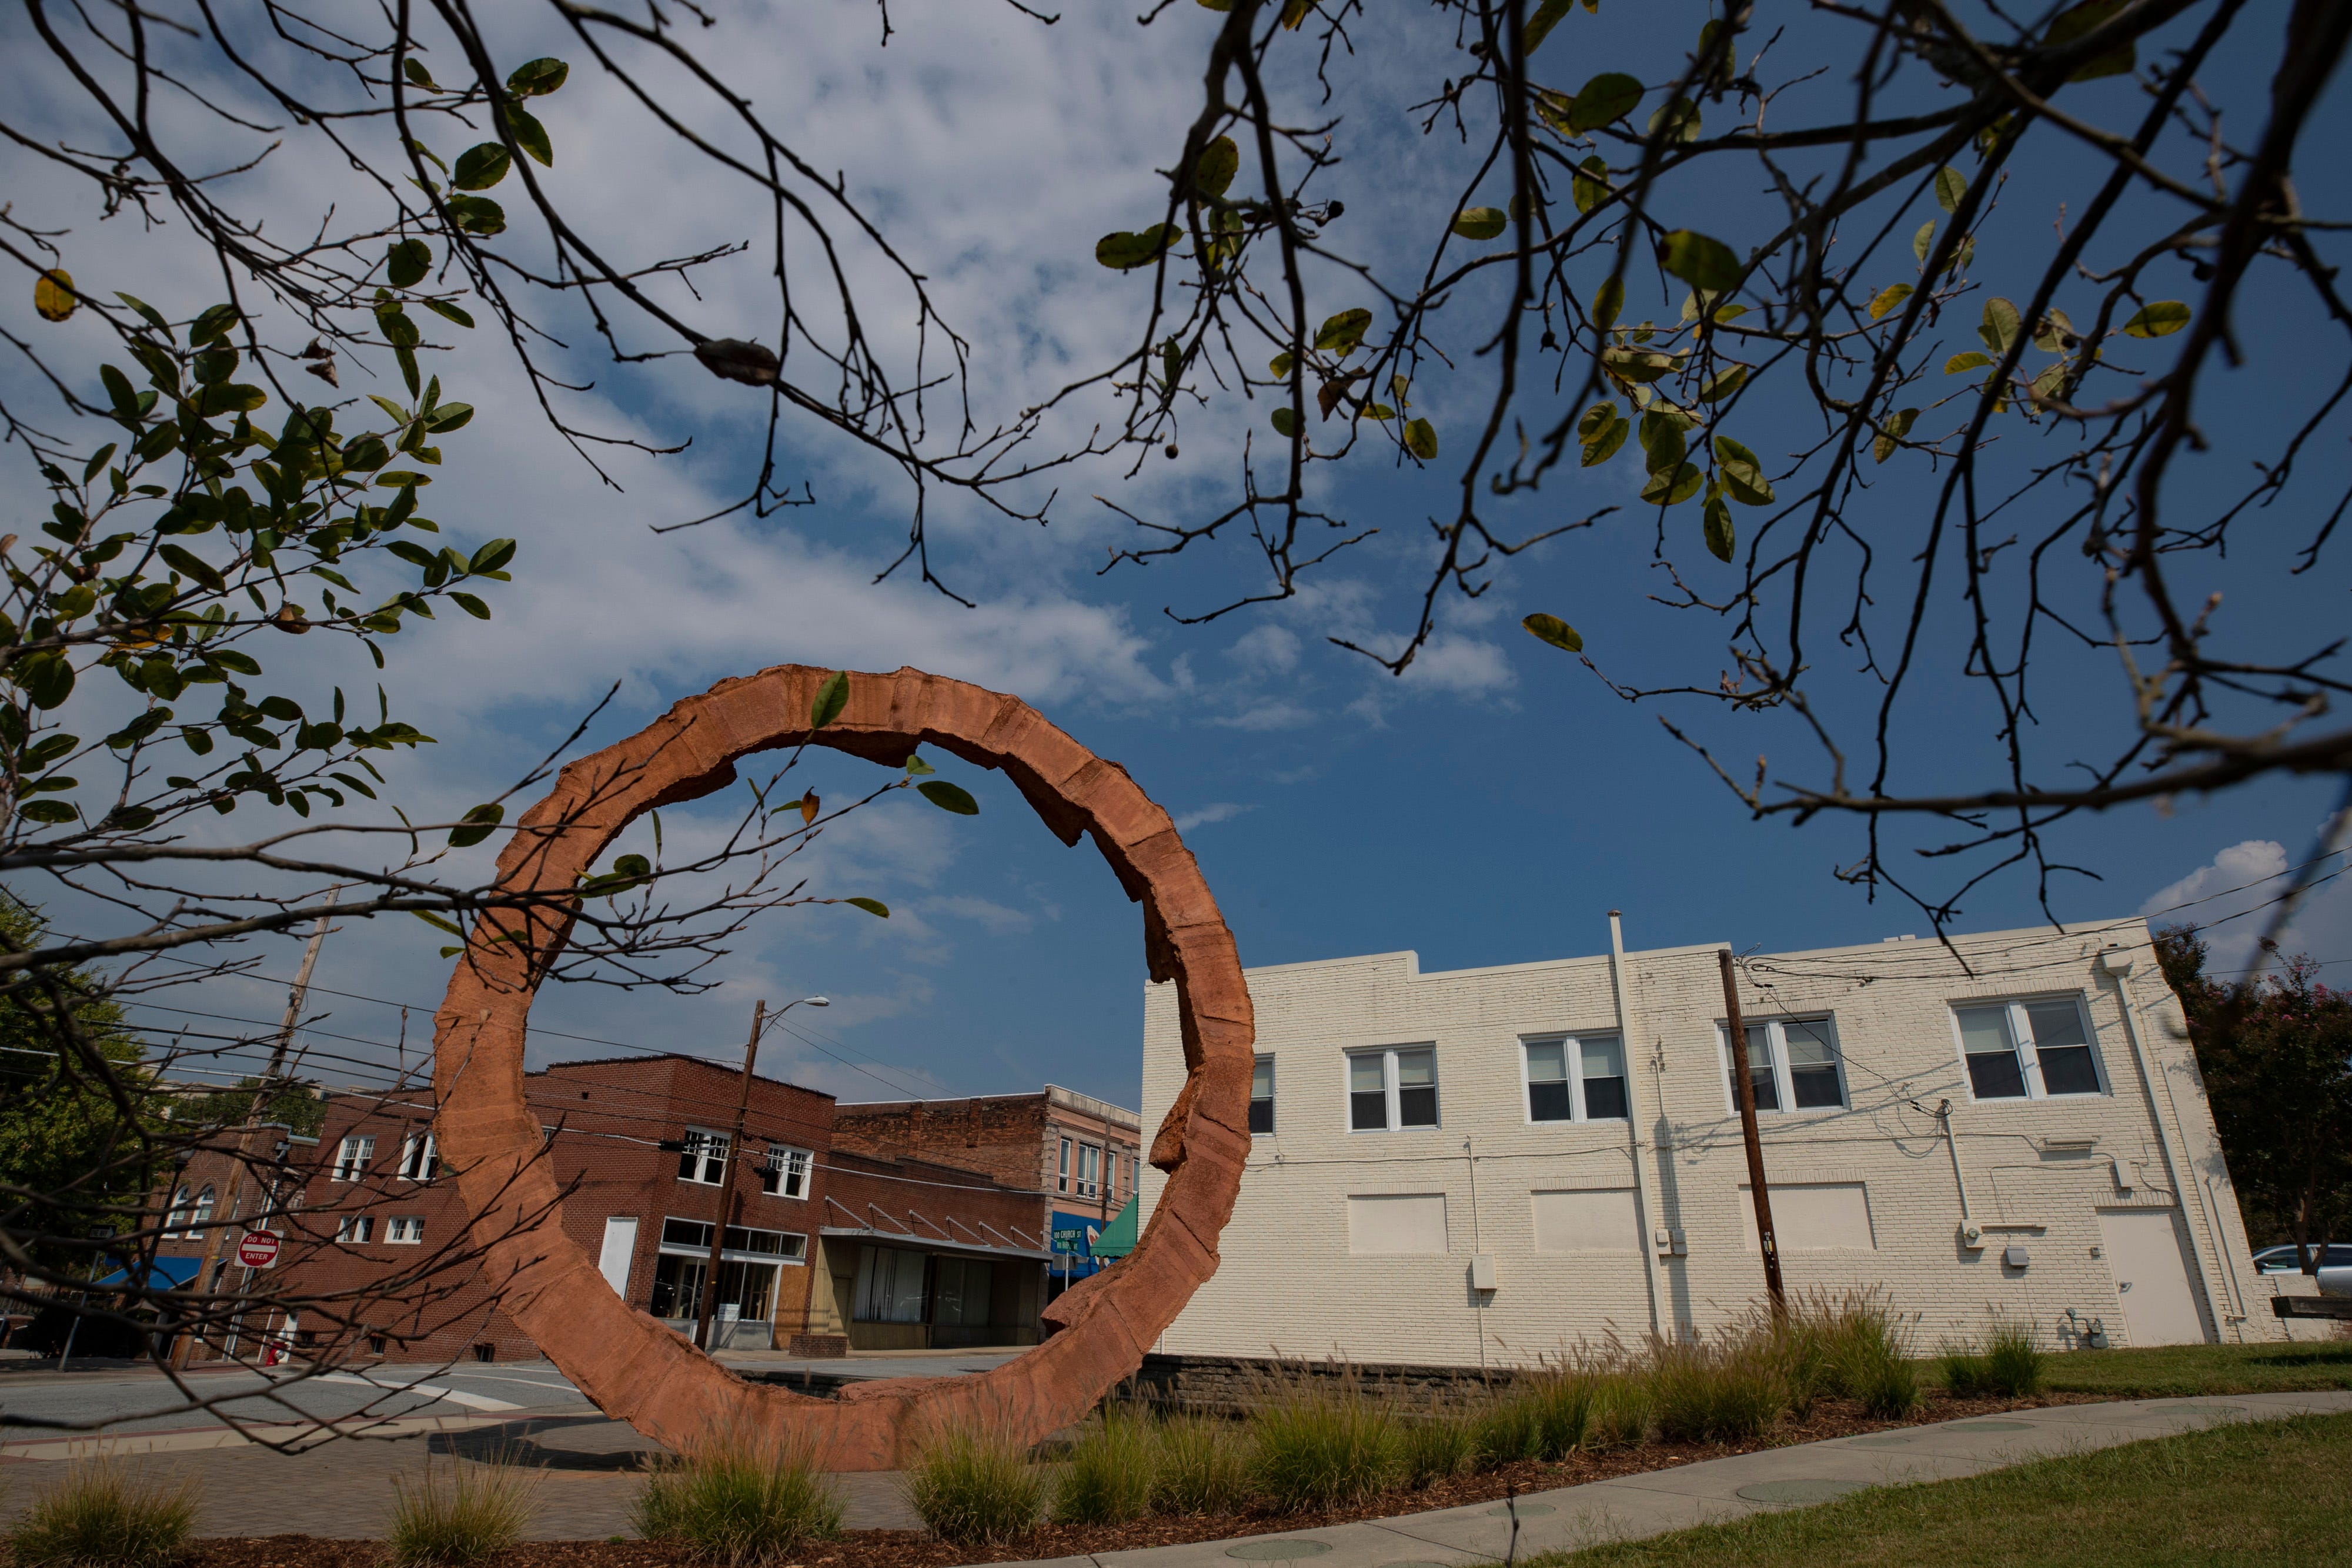 The "Across the Grain" sculpture by Thomas Sayre in downtown Lenoir, North Carolina. Oct. 1, 2019